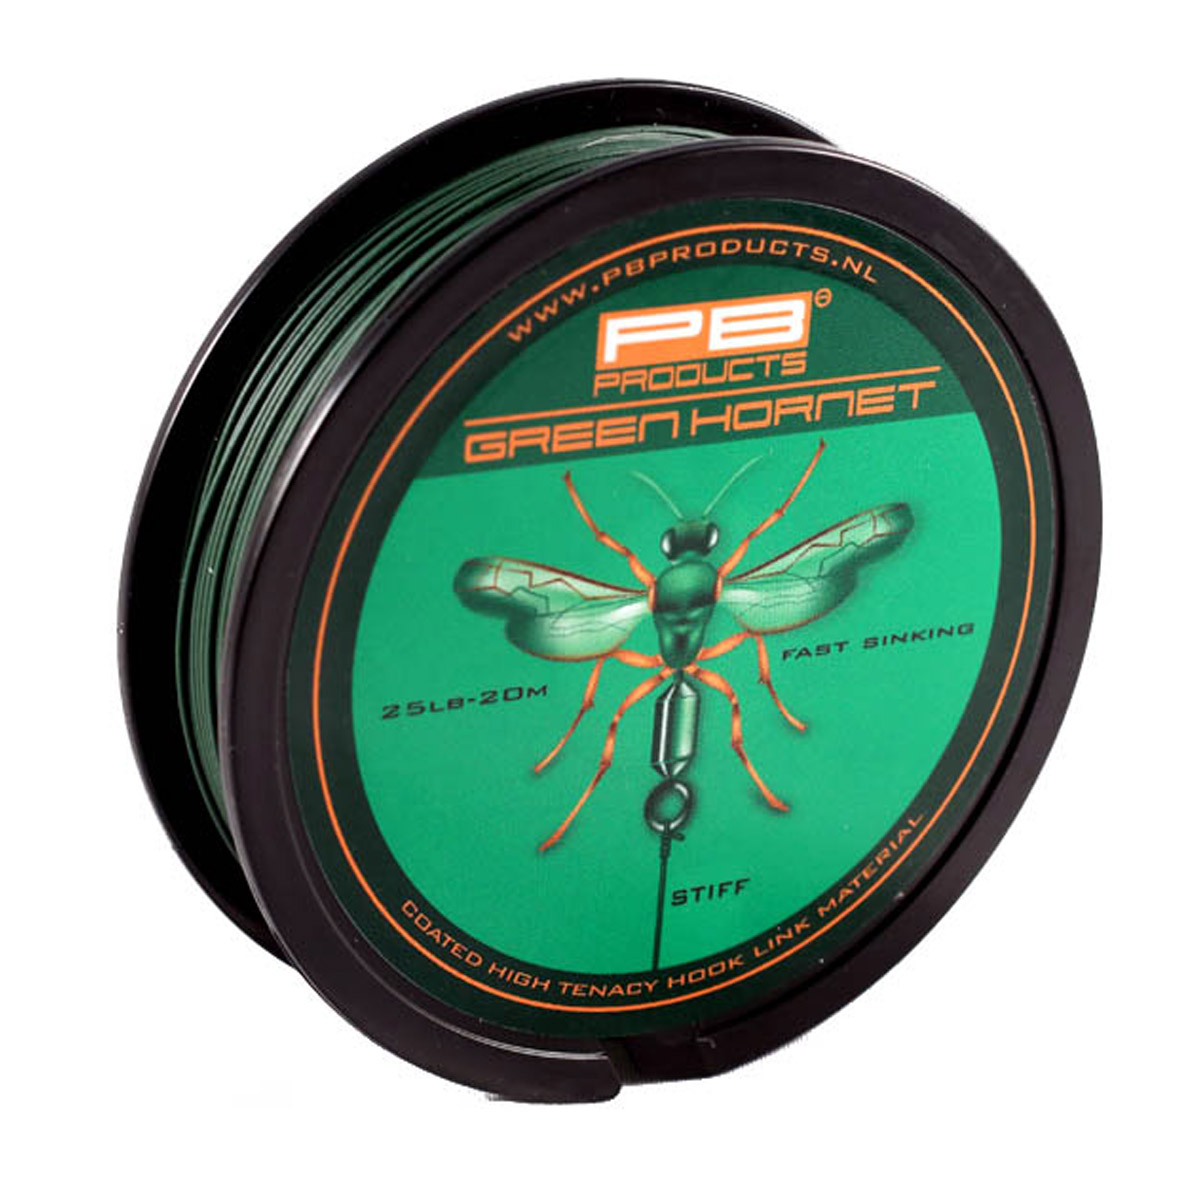 PB Products Green Hornet Weed 20 M